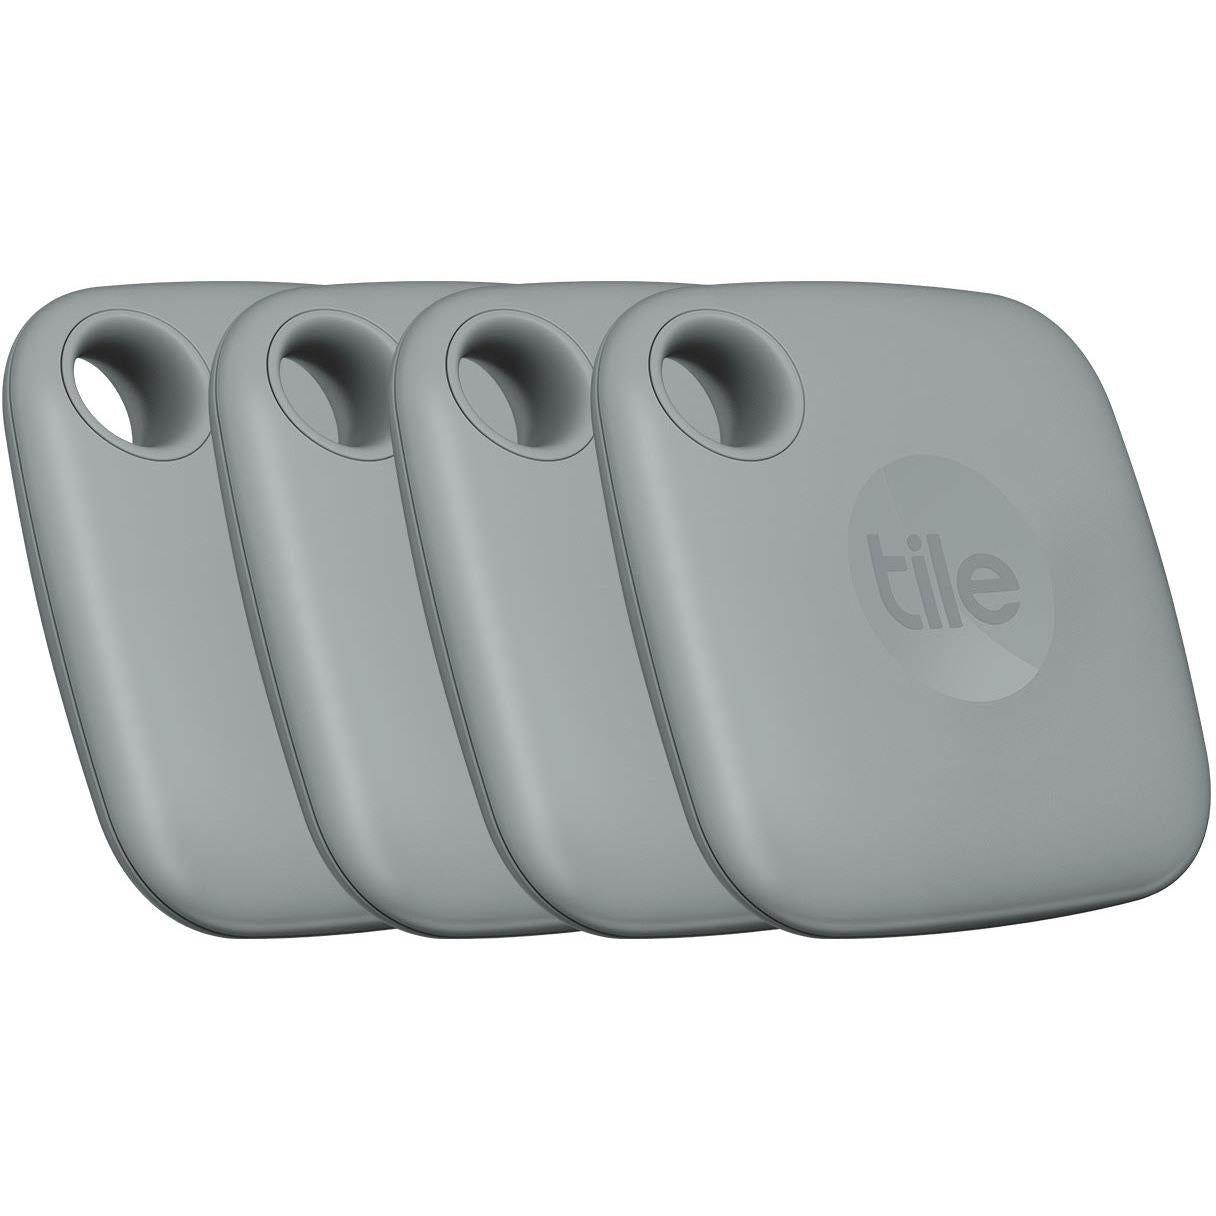 tile mate bluetooth tracker (winter haven) 4 pack